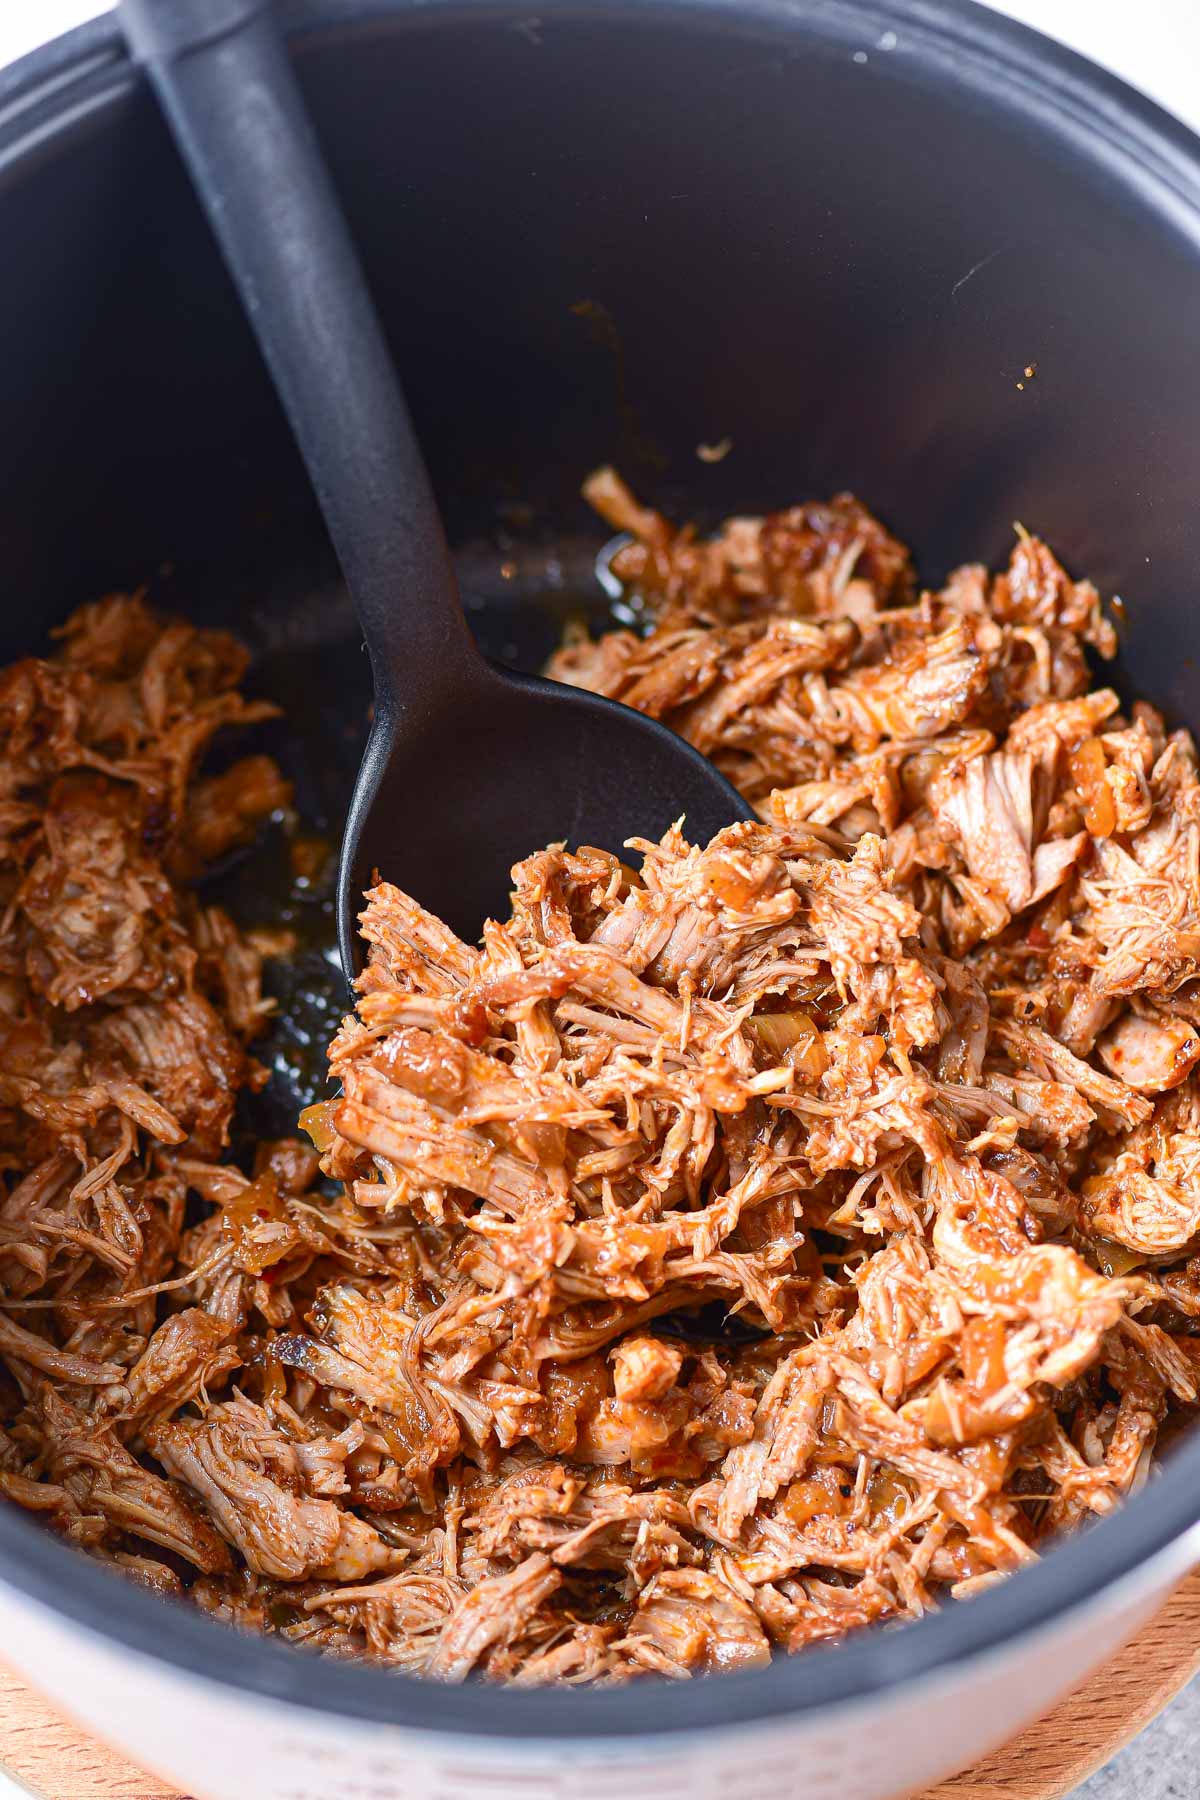 a serving spoon scooping out some of the dutch oven pulled pork